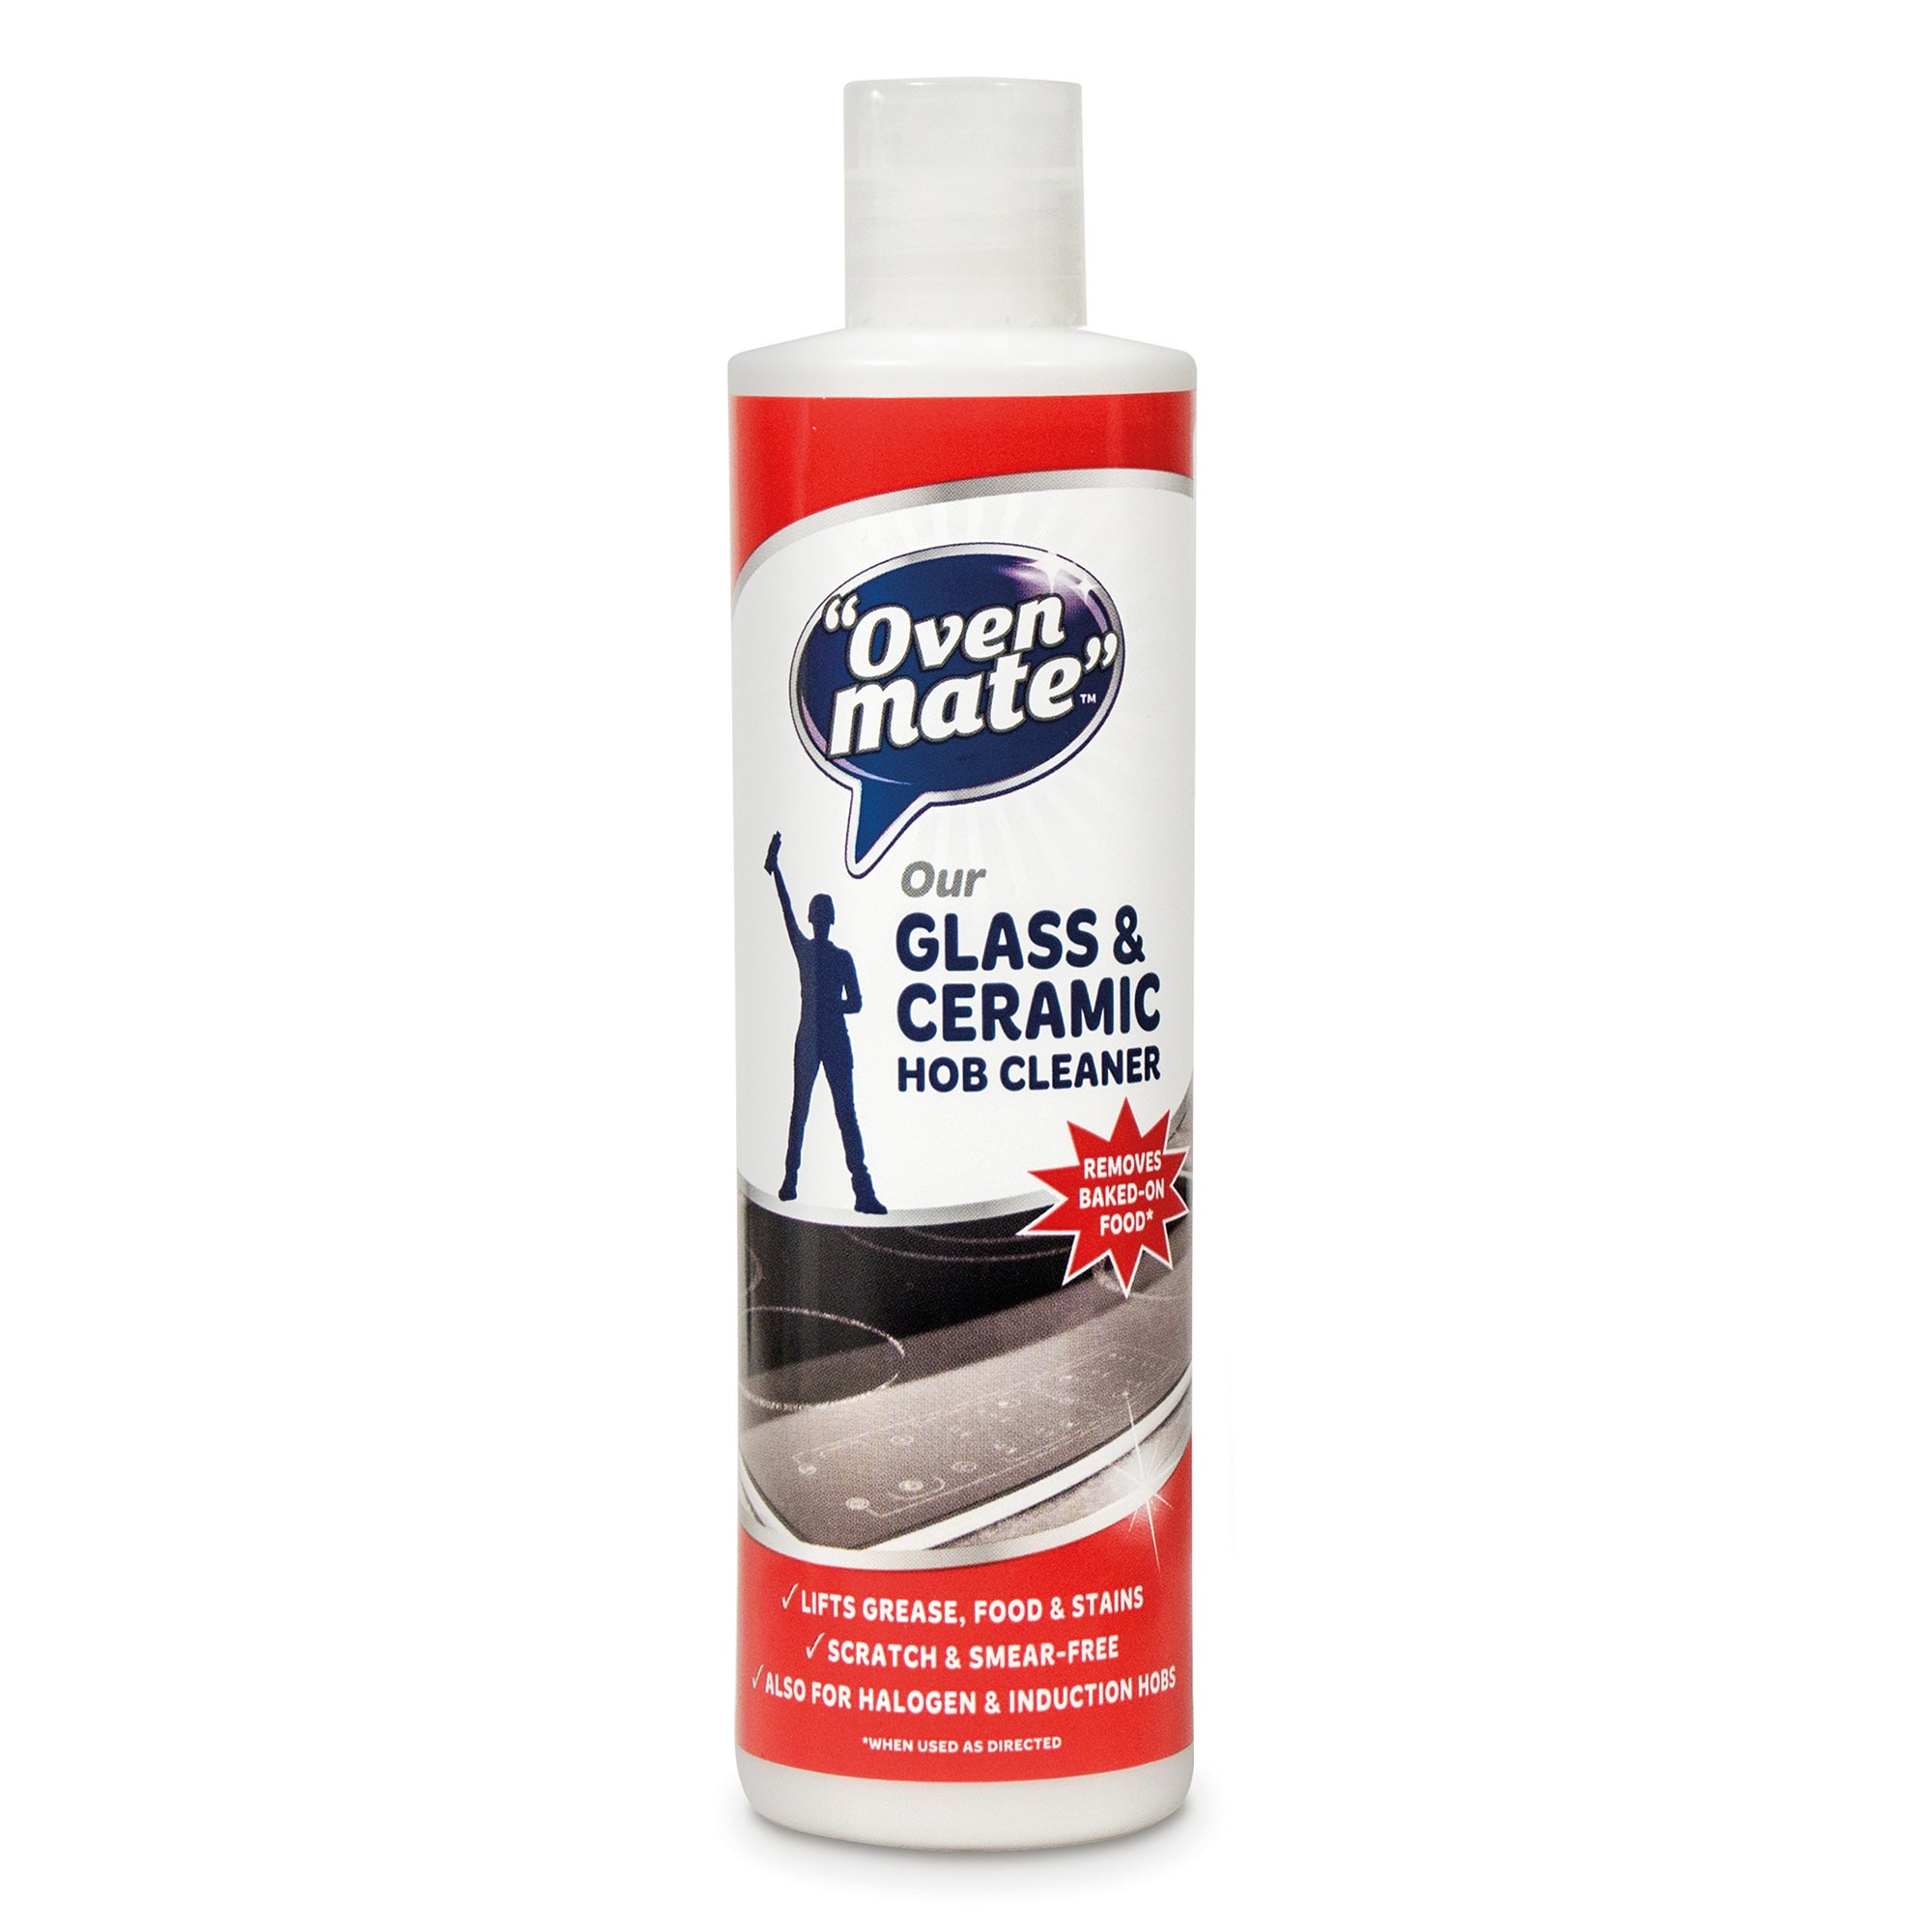 Oven Mate Glass and Ceramic Hob Cleaner | Dunelm